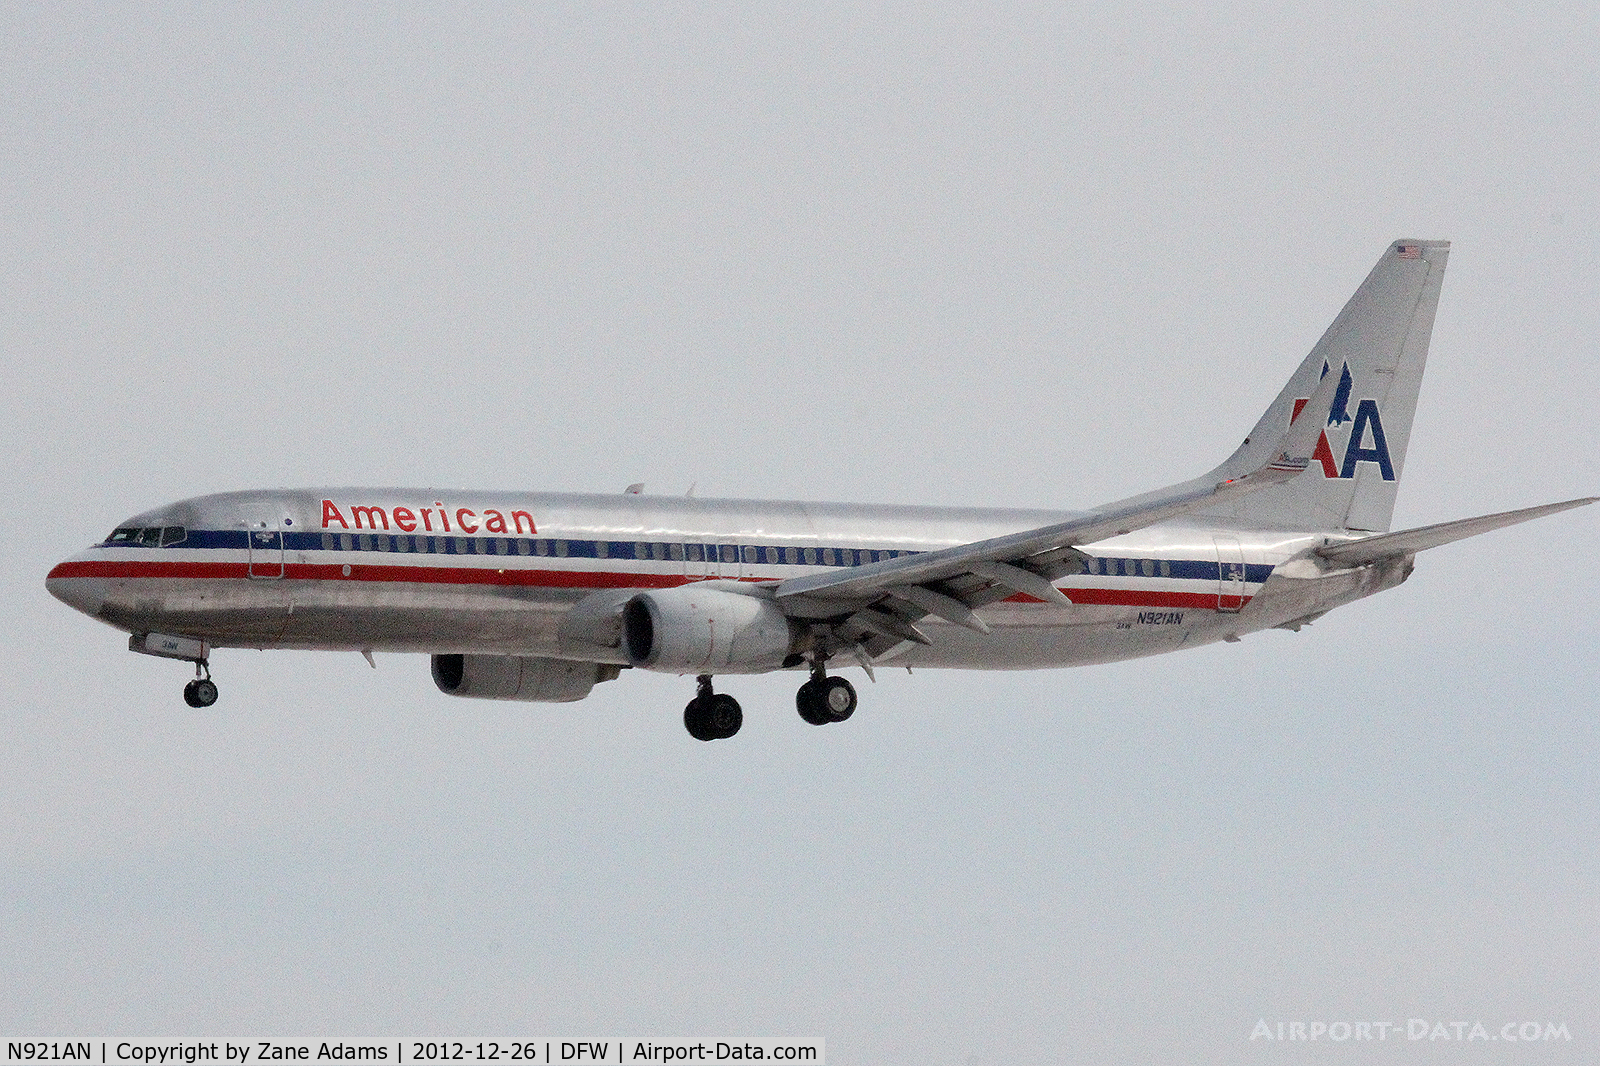 N921AN, 1999 Boeing 737-823 C/N 29522, American Airlines at DFW Airport.